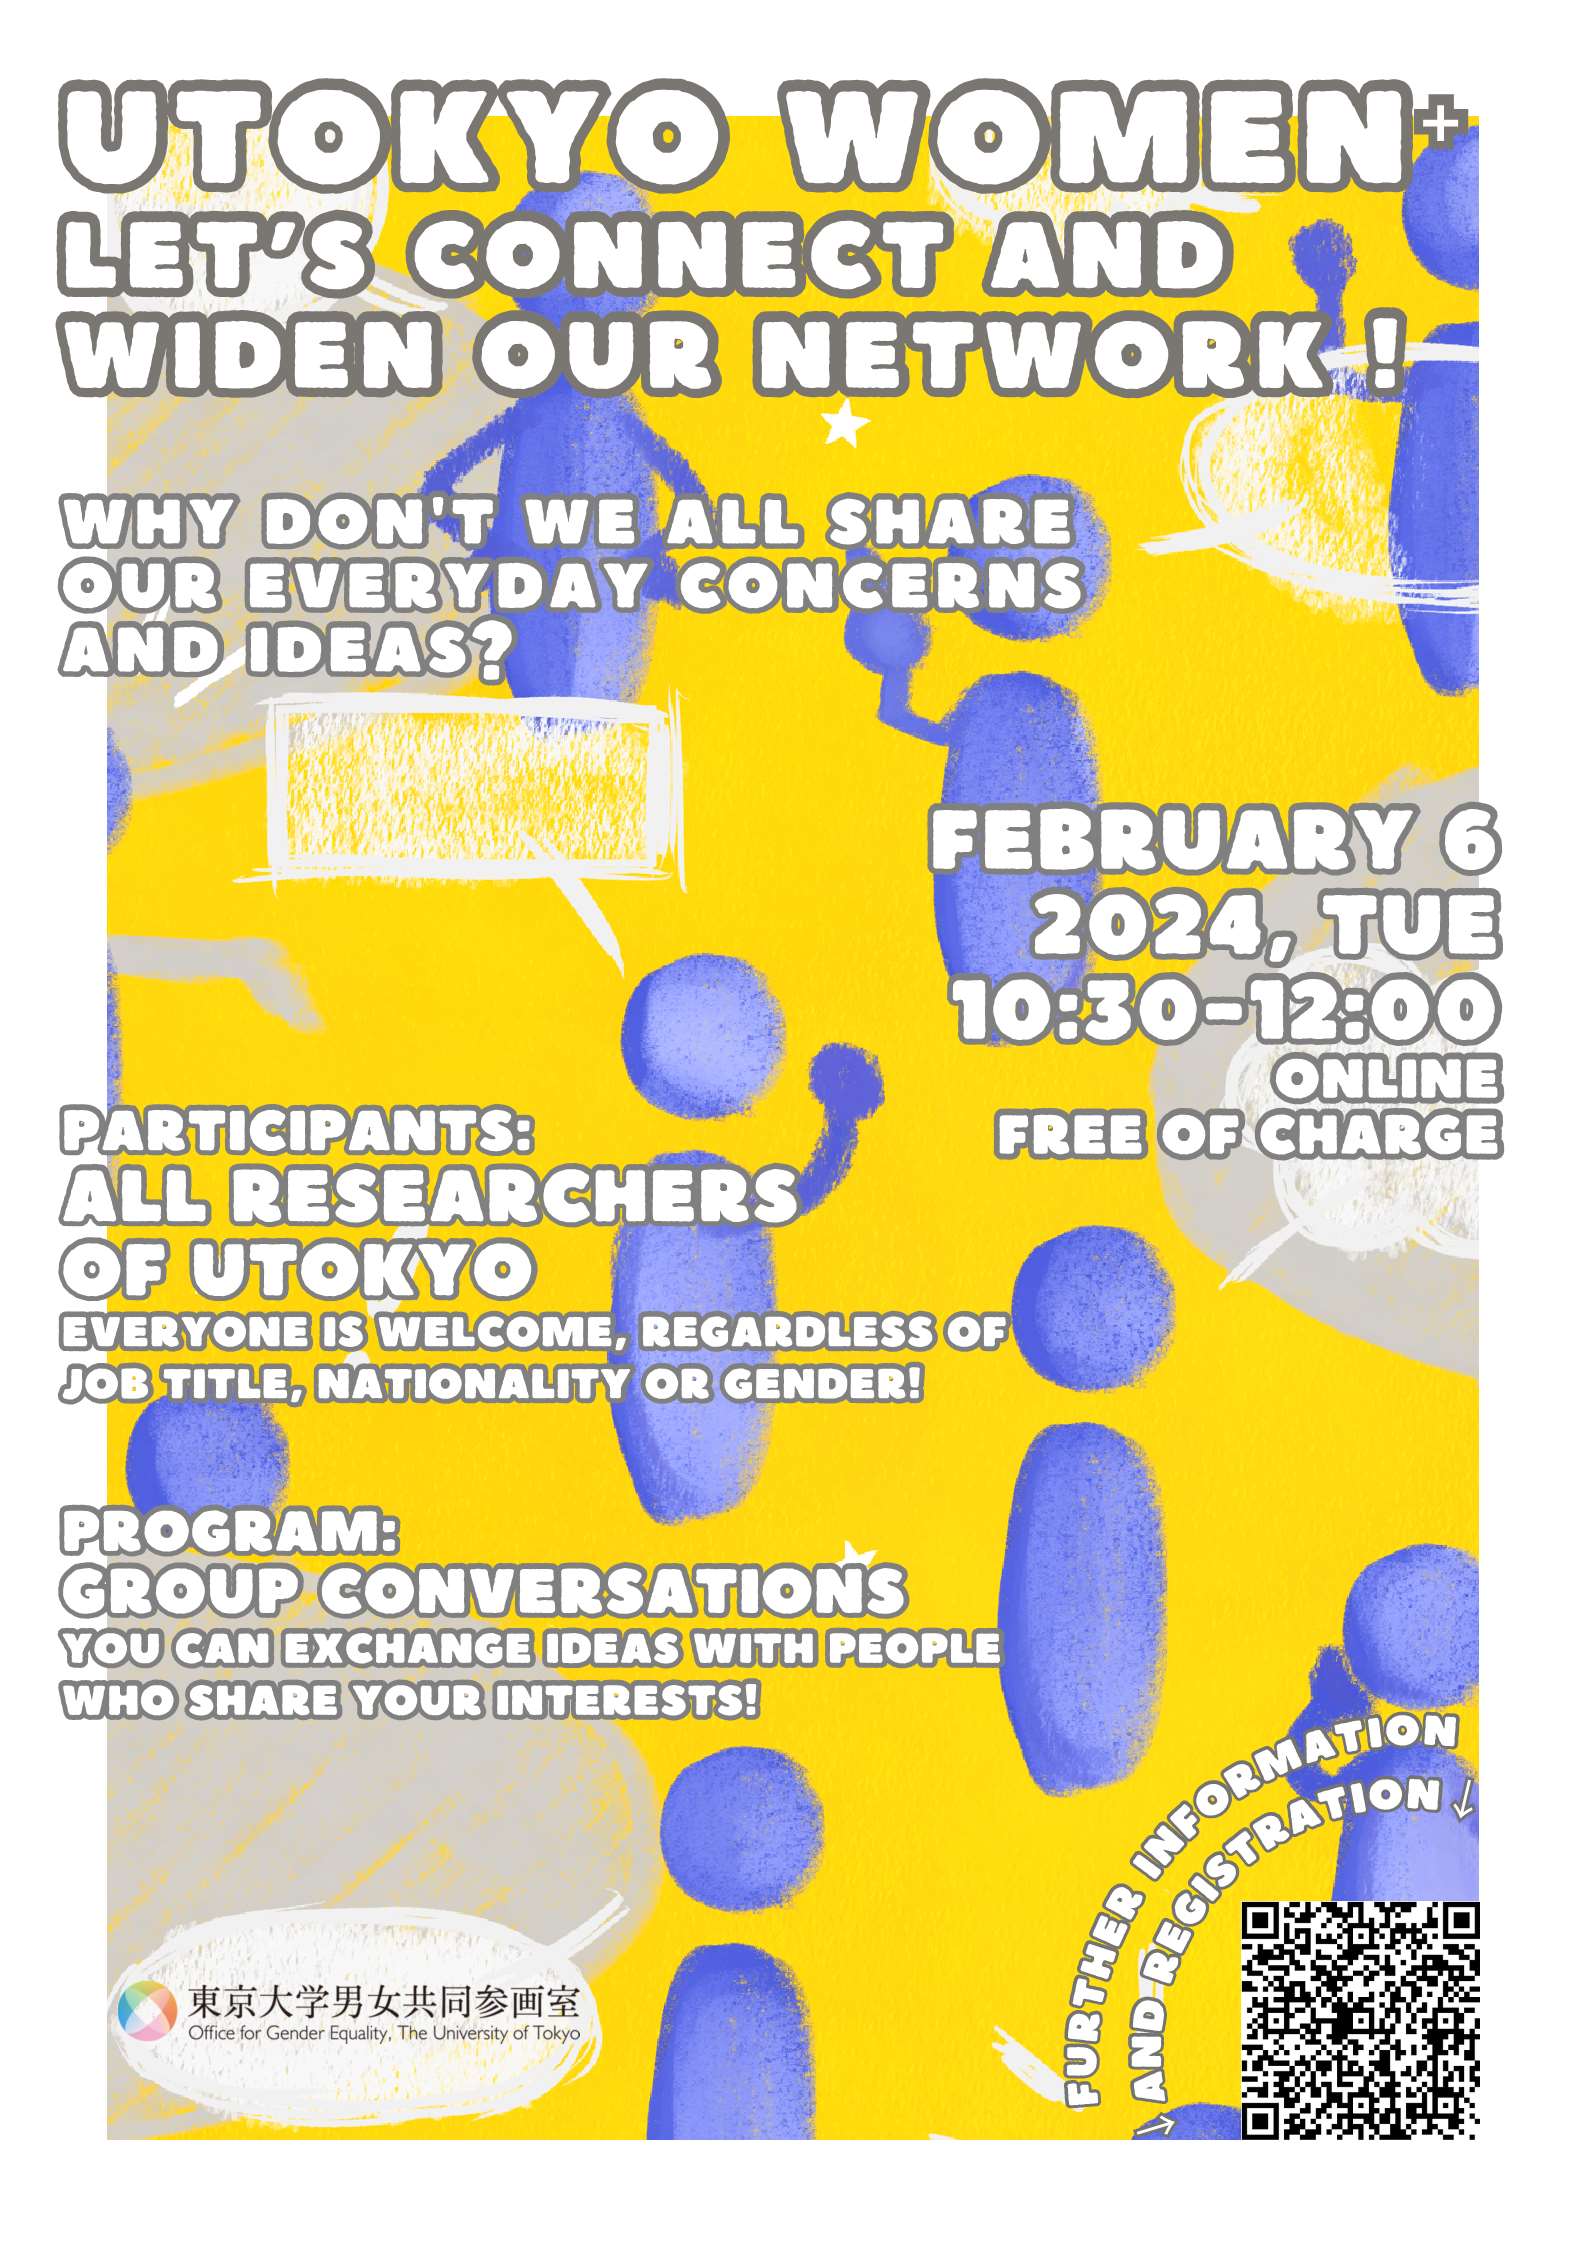 【Call for Participants】UTokyo Women⁺ Researchers’ Network Meeting on Feb 6